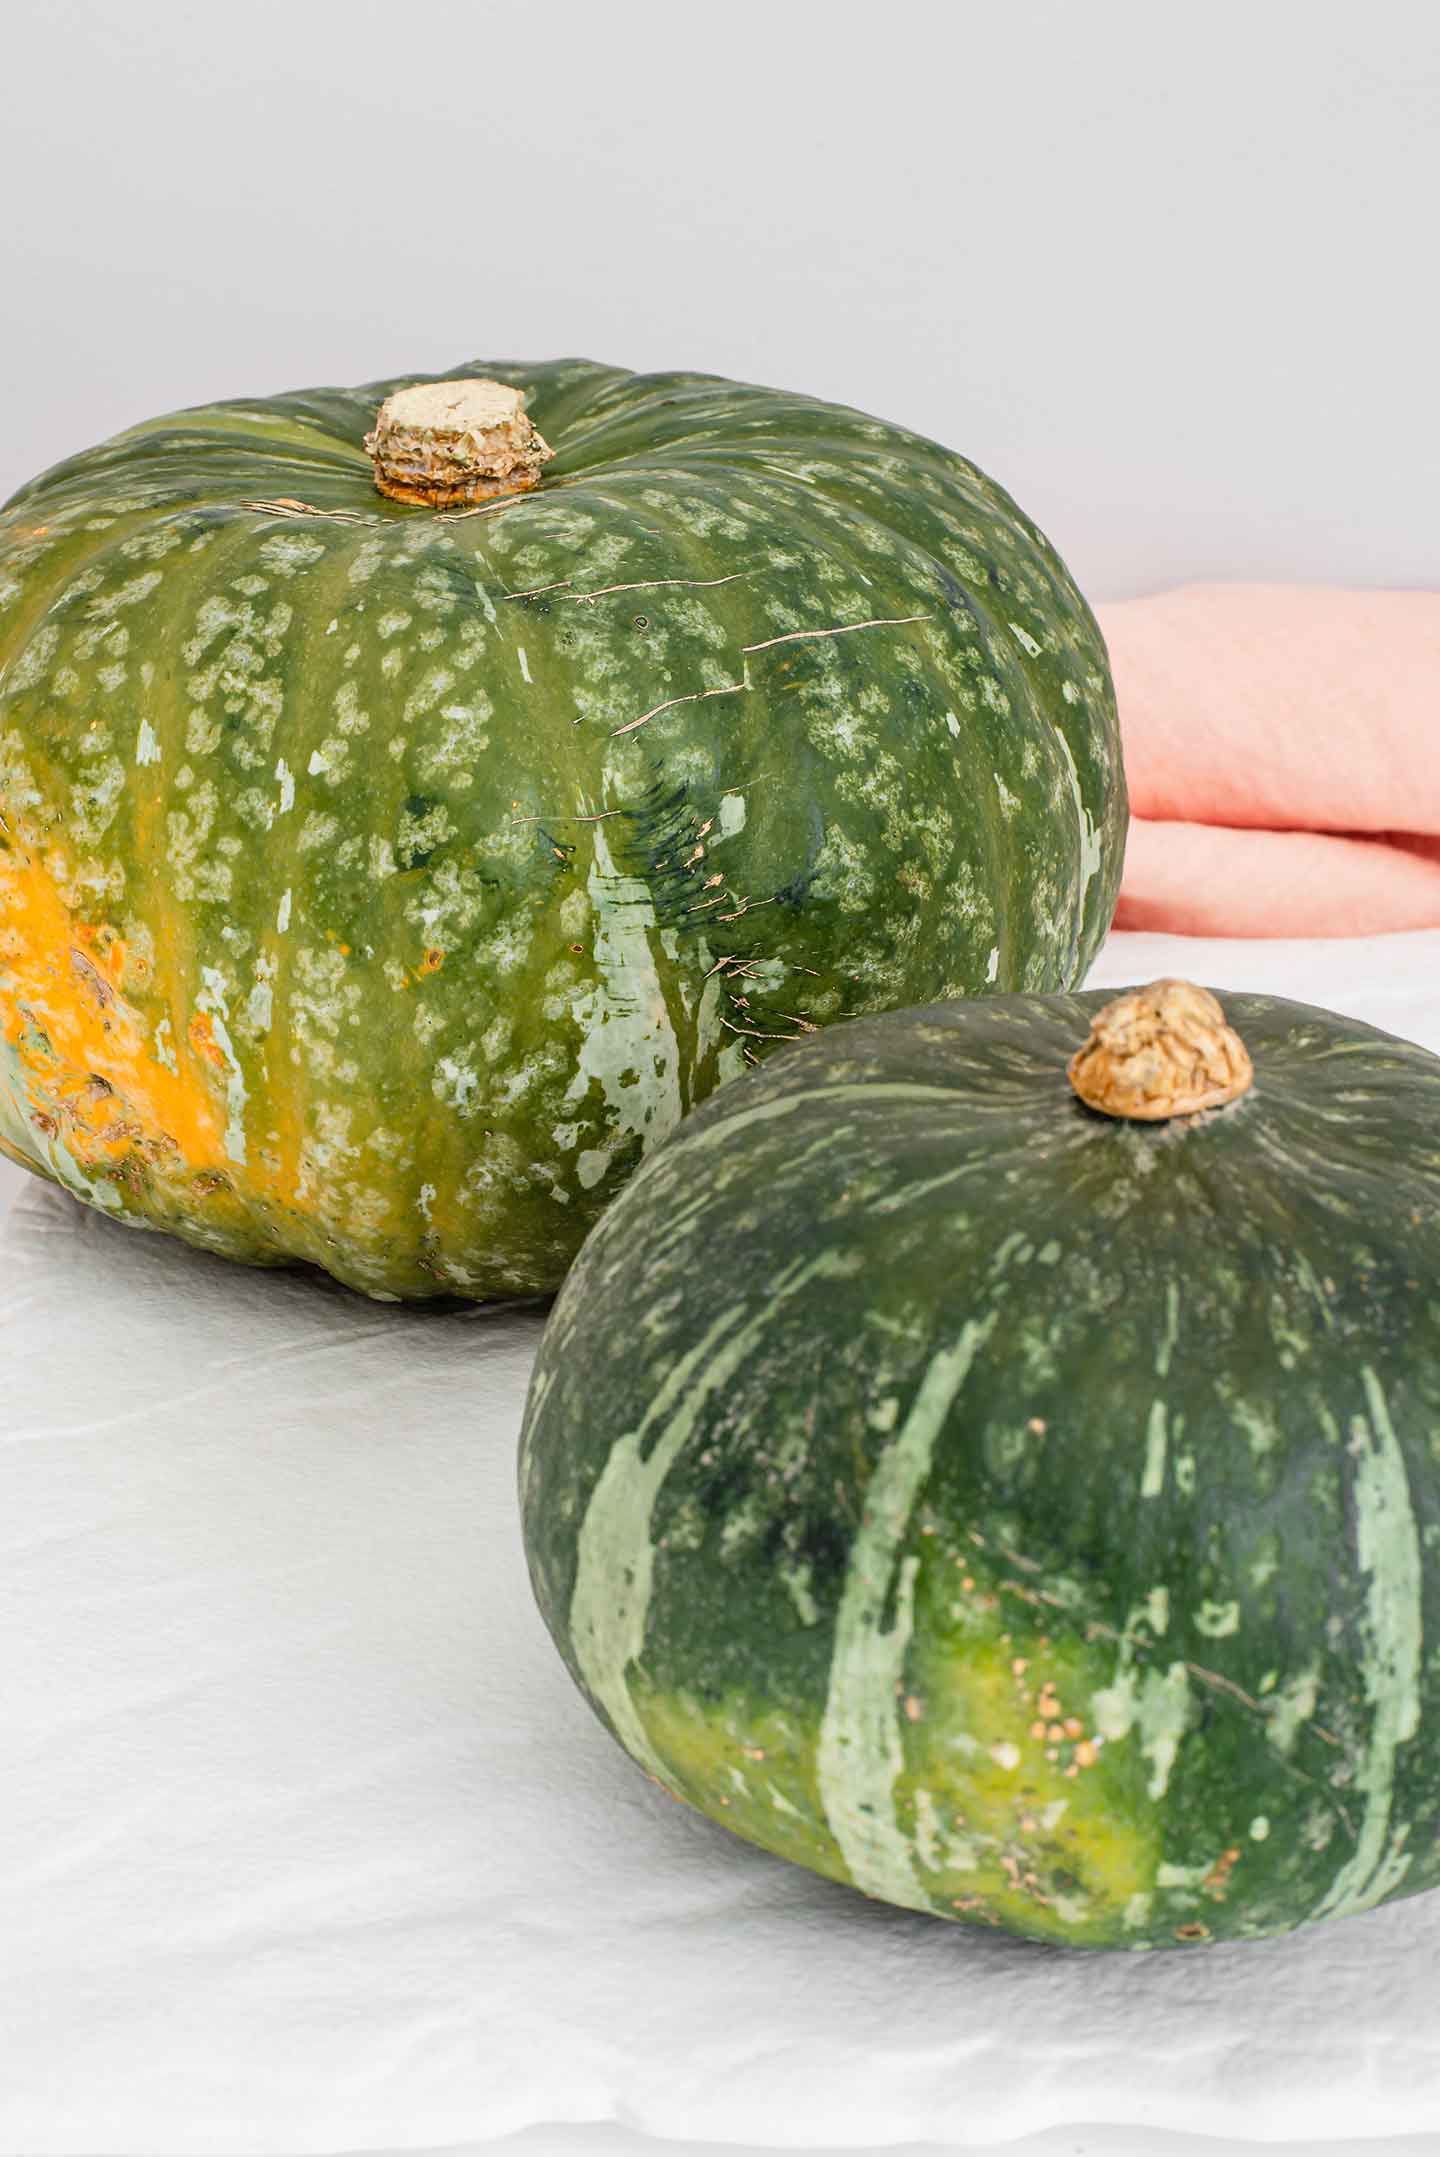 Side view of two whole kabocha squash demonstrates the variation in size from large to small.